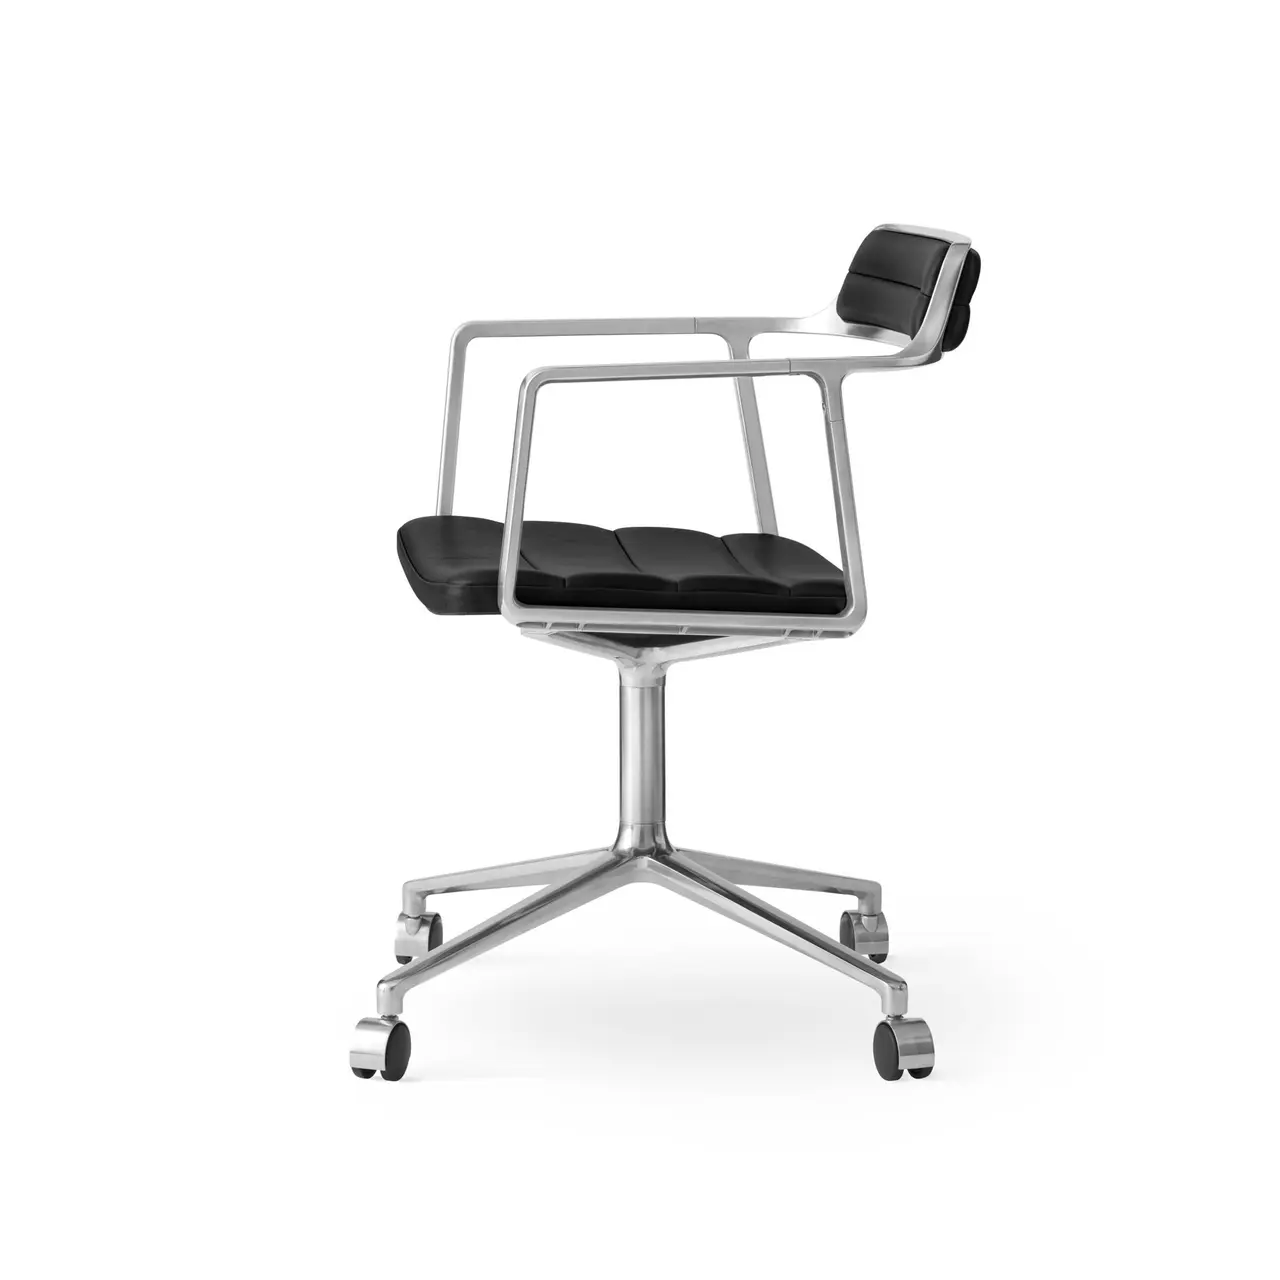 VIPP 452 // SWIVEL CHAIR - BLACK LEATHER, POLISHED FRAME, CASTERS